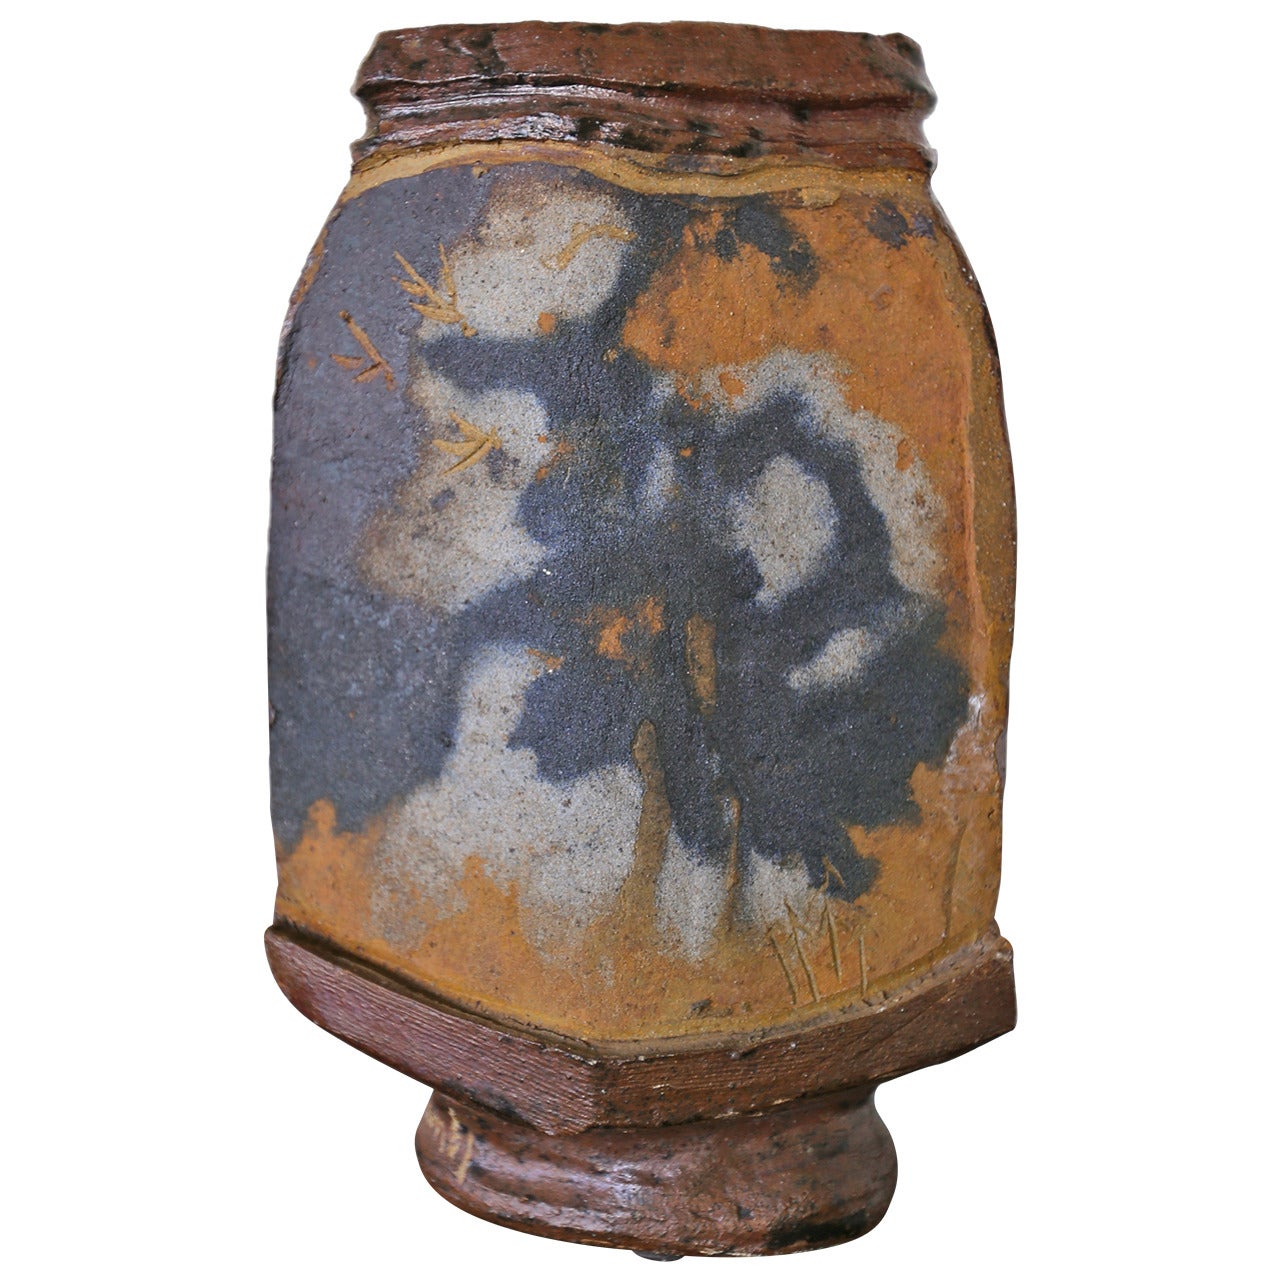 Large Ceramic Vase by Jerry Rothman